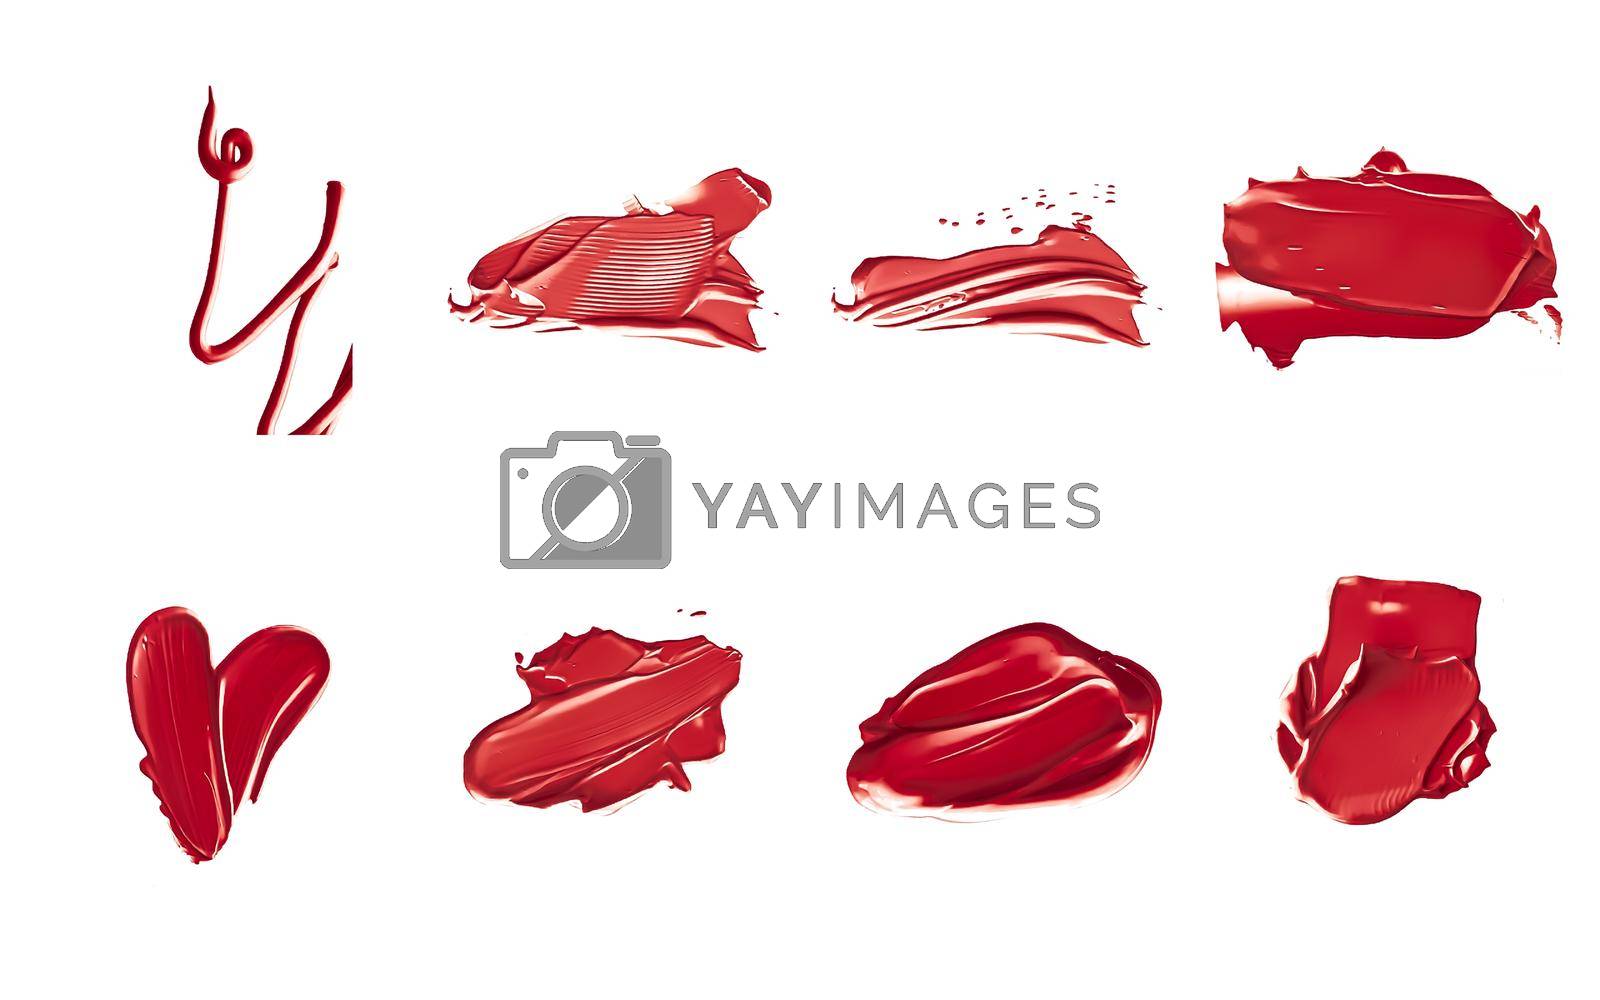 Royalty free image of Red lipstick samples as beauty cosmetic texture isolated on white background, makeup smear or smudge as cosmetics product or paint strokes by Anneleven